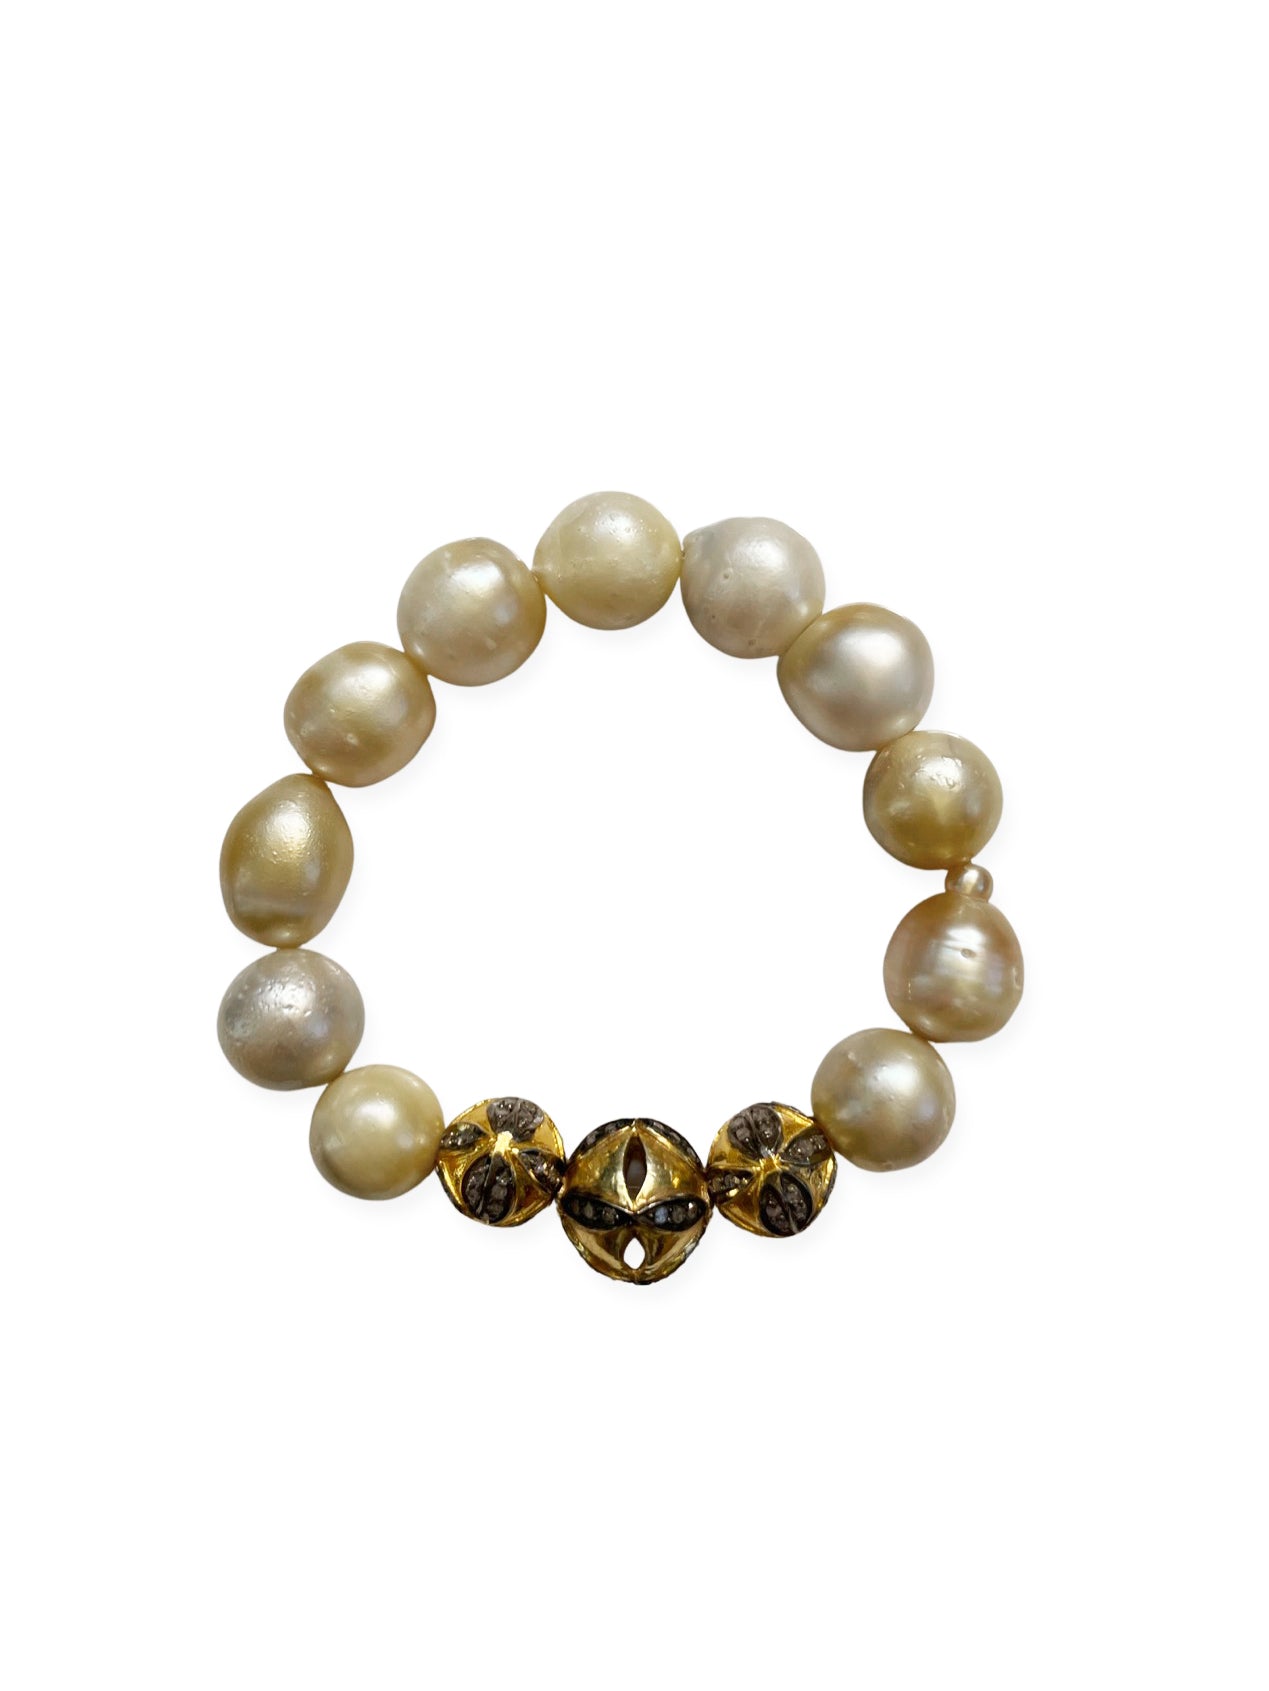 Golden South Sea Pearls with Three Pave Diamond Mixed Metal Beads